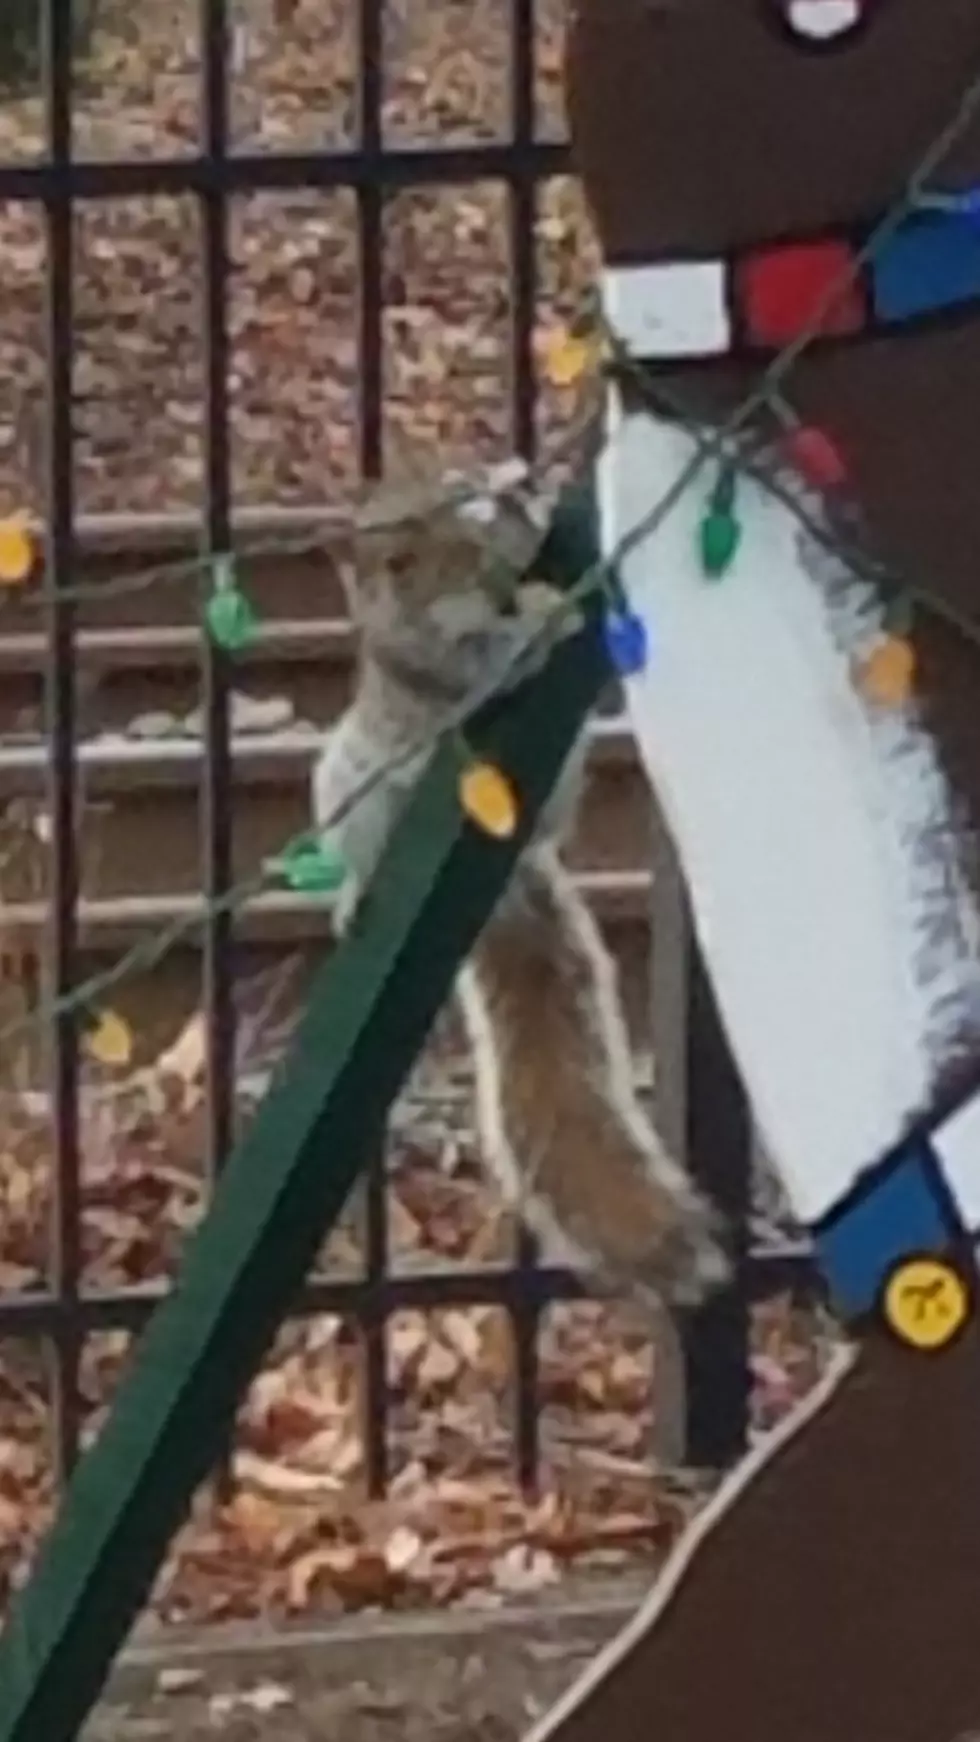 Squirrel “charged” with criminal mischief for breaking holiday lights